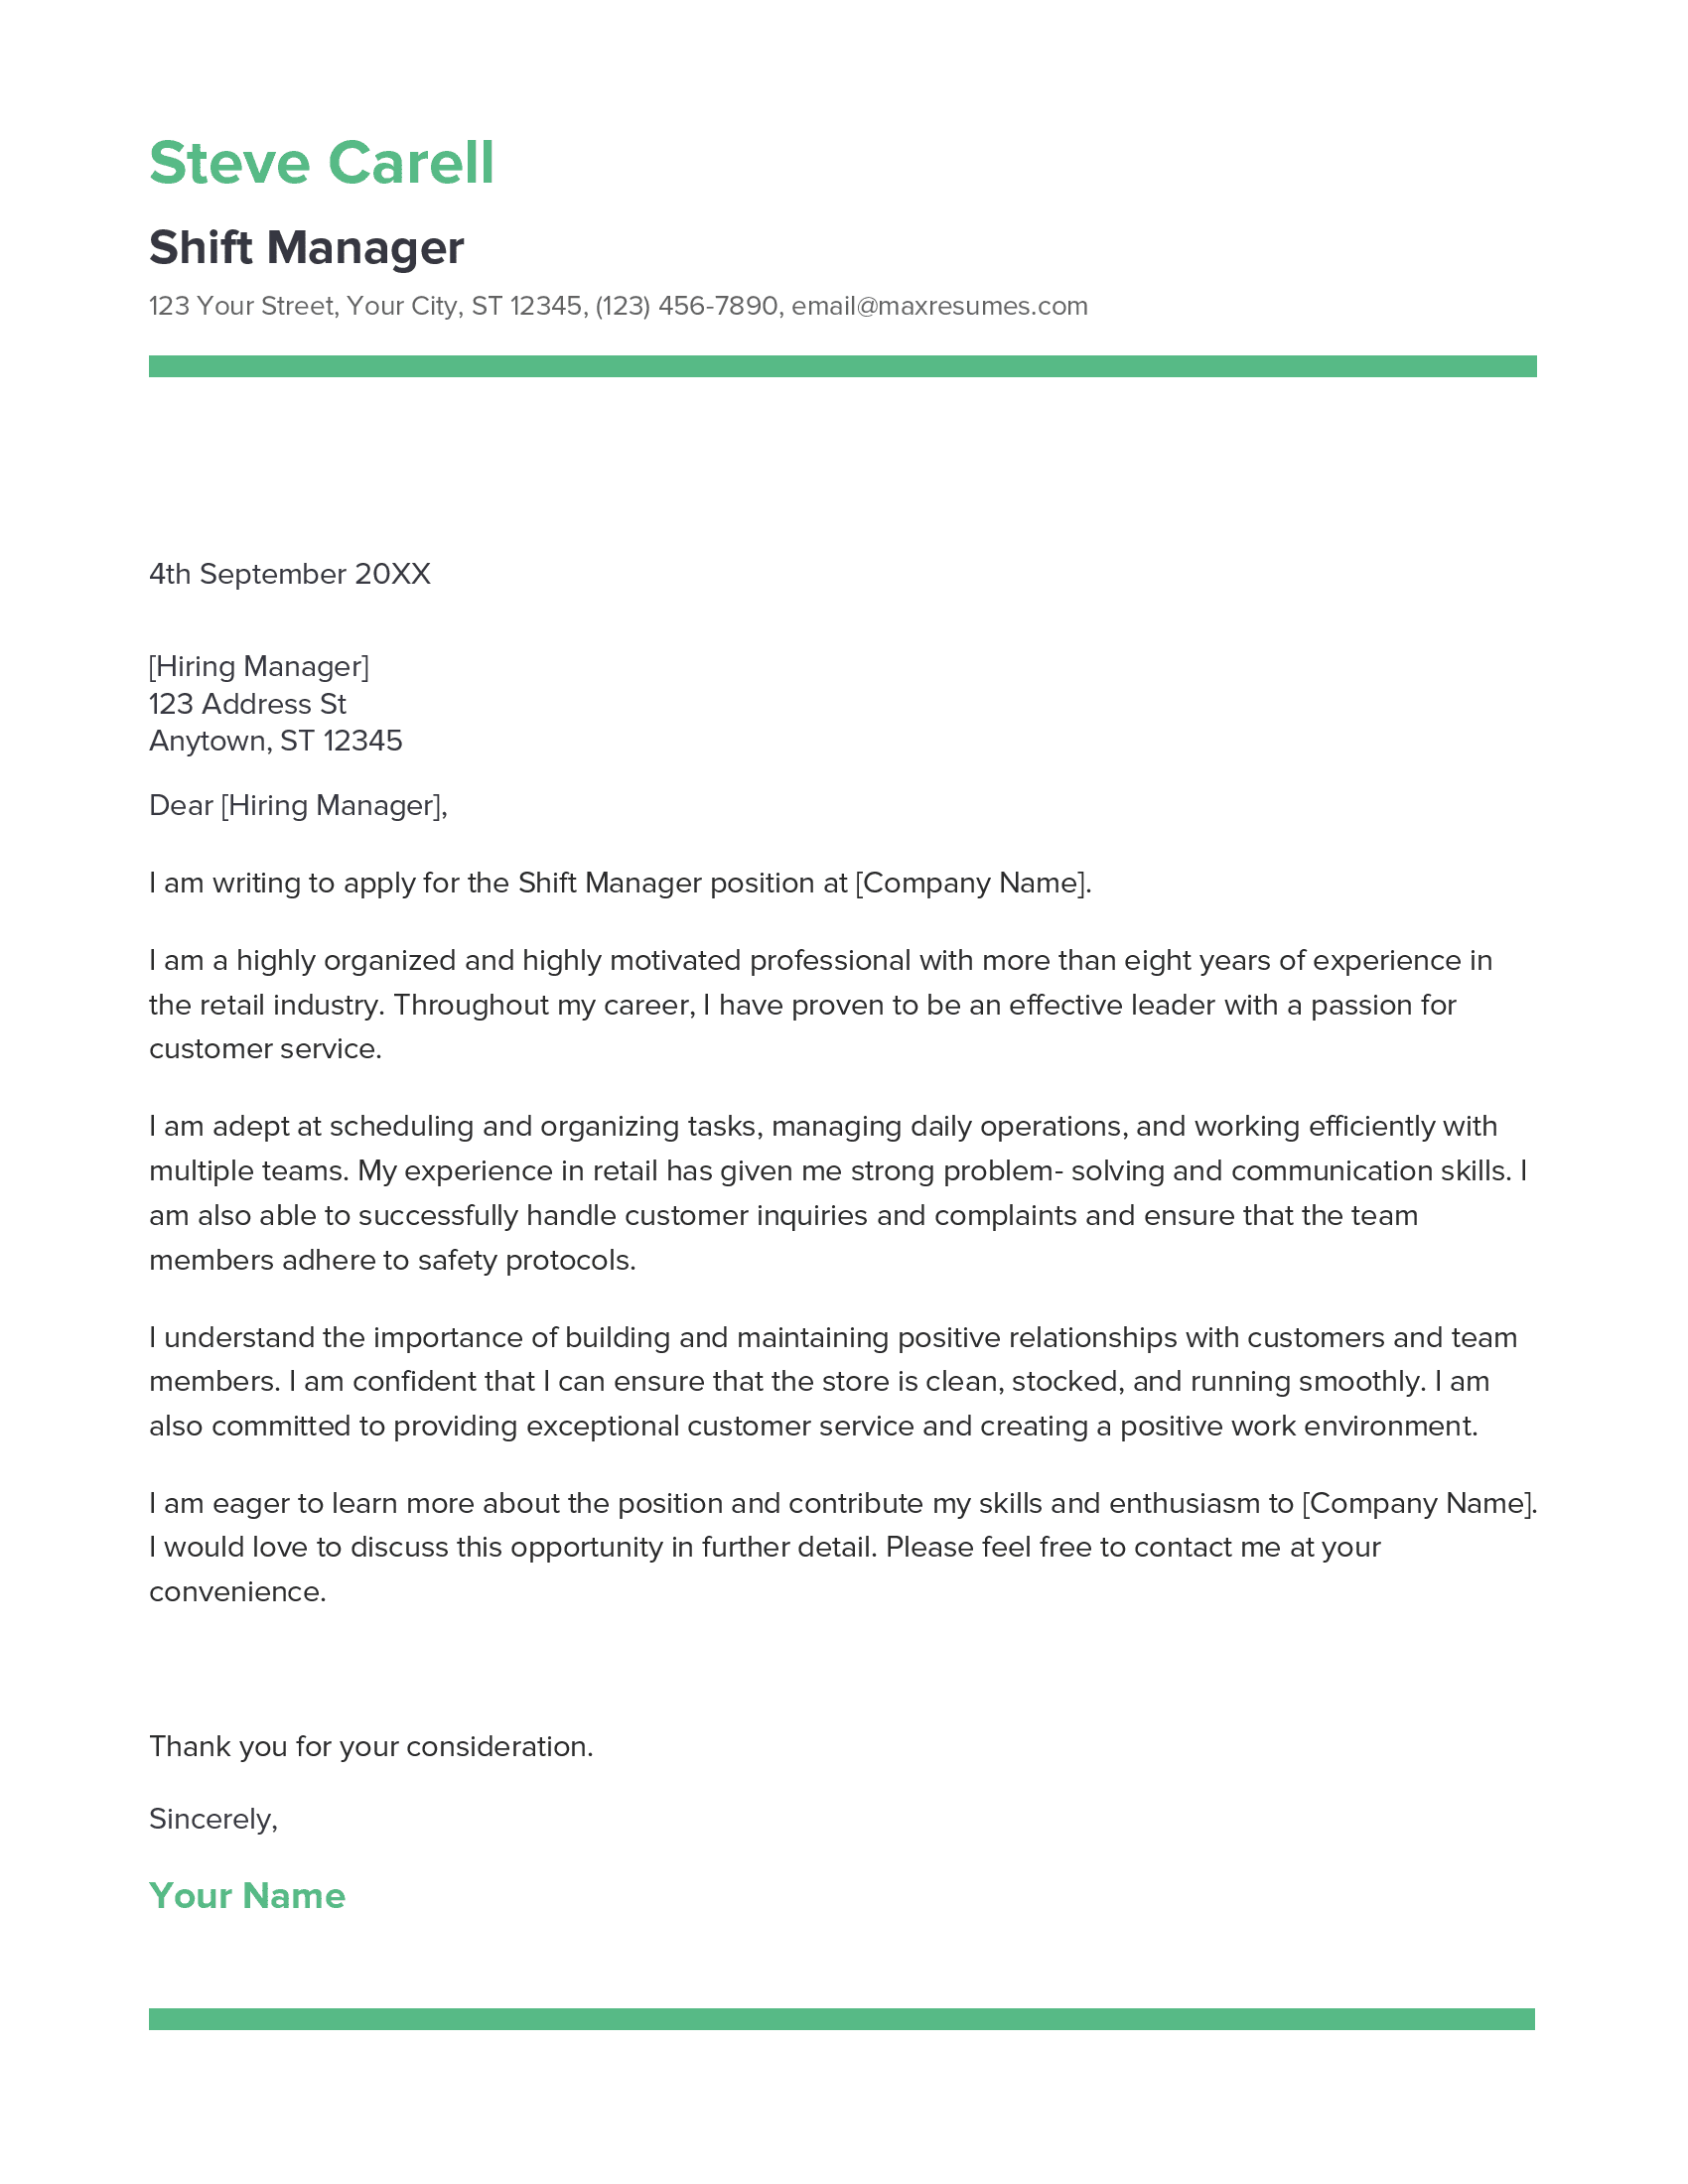 Shift Manager Cover Letter Example